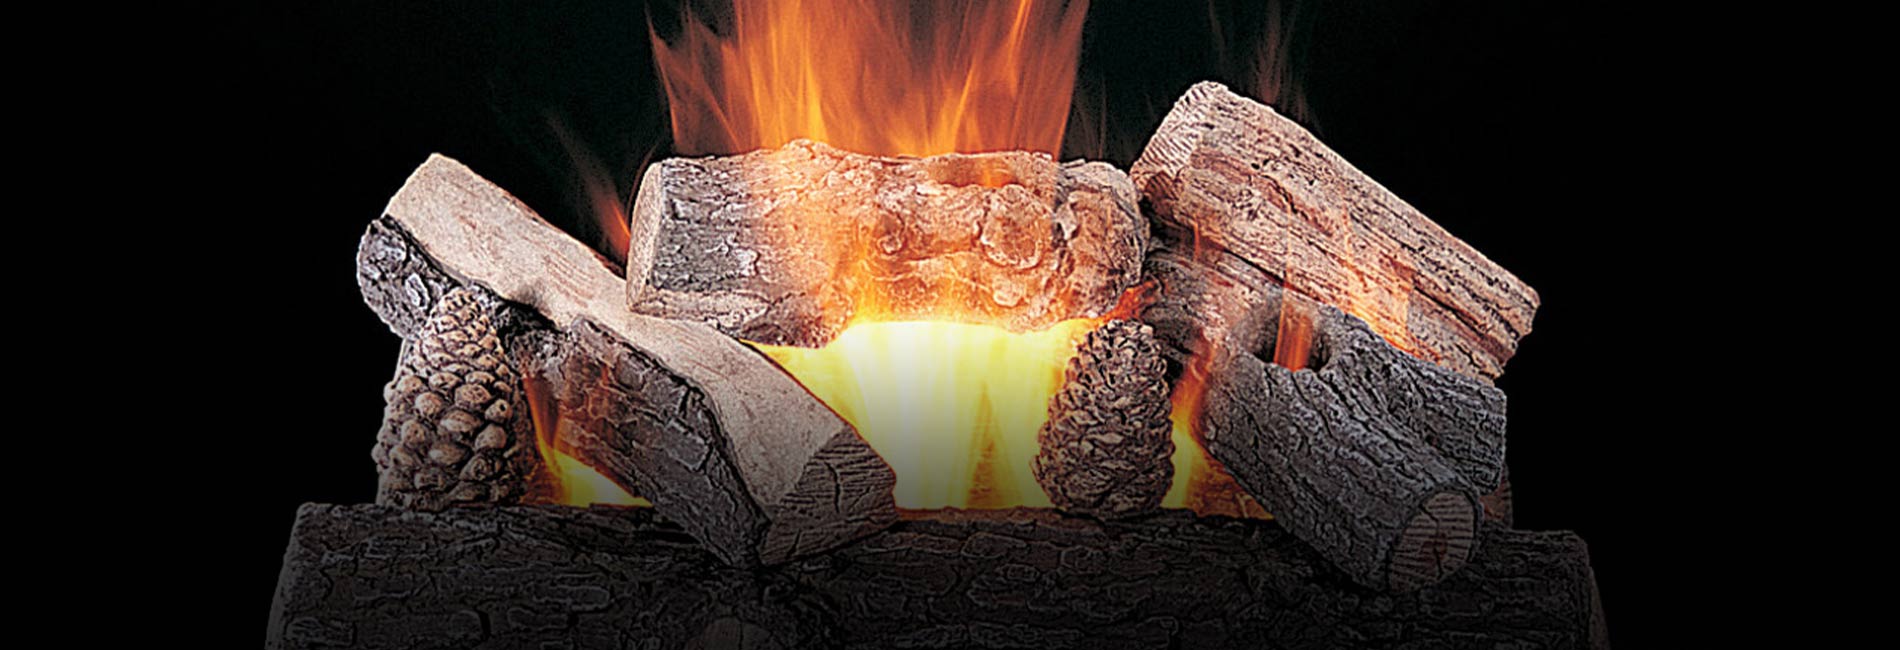 Rasmussen Fireplace Products